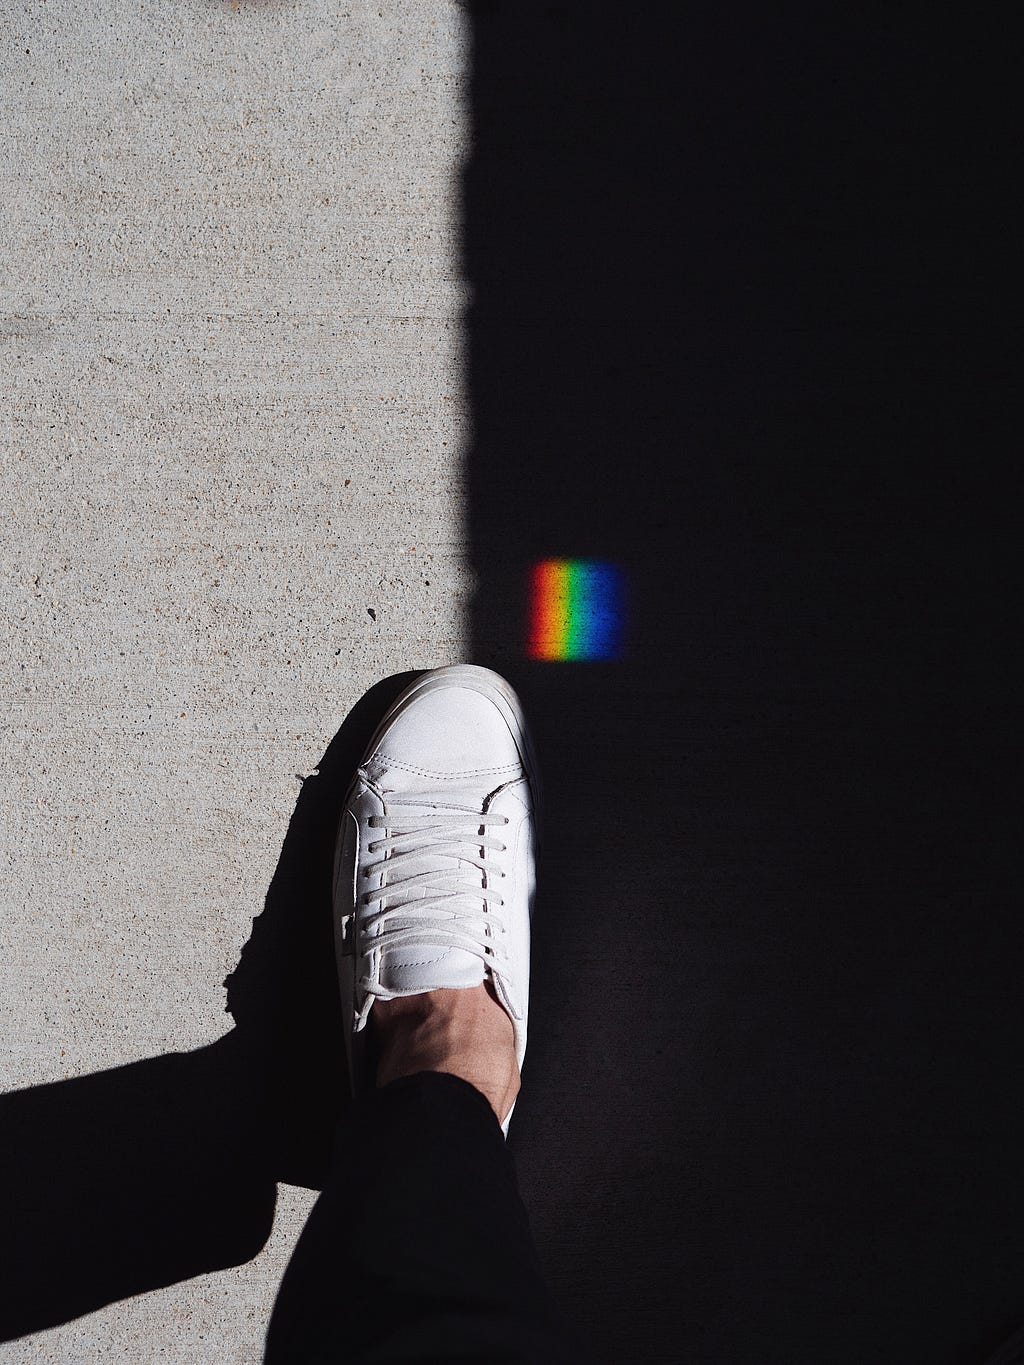 A white shoe on a pavement bisected by a dark, black shadow. To the left is light-gray pavement. To the right is the shadow. Above the show is a small square patch of rainbow light.